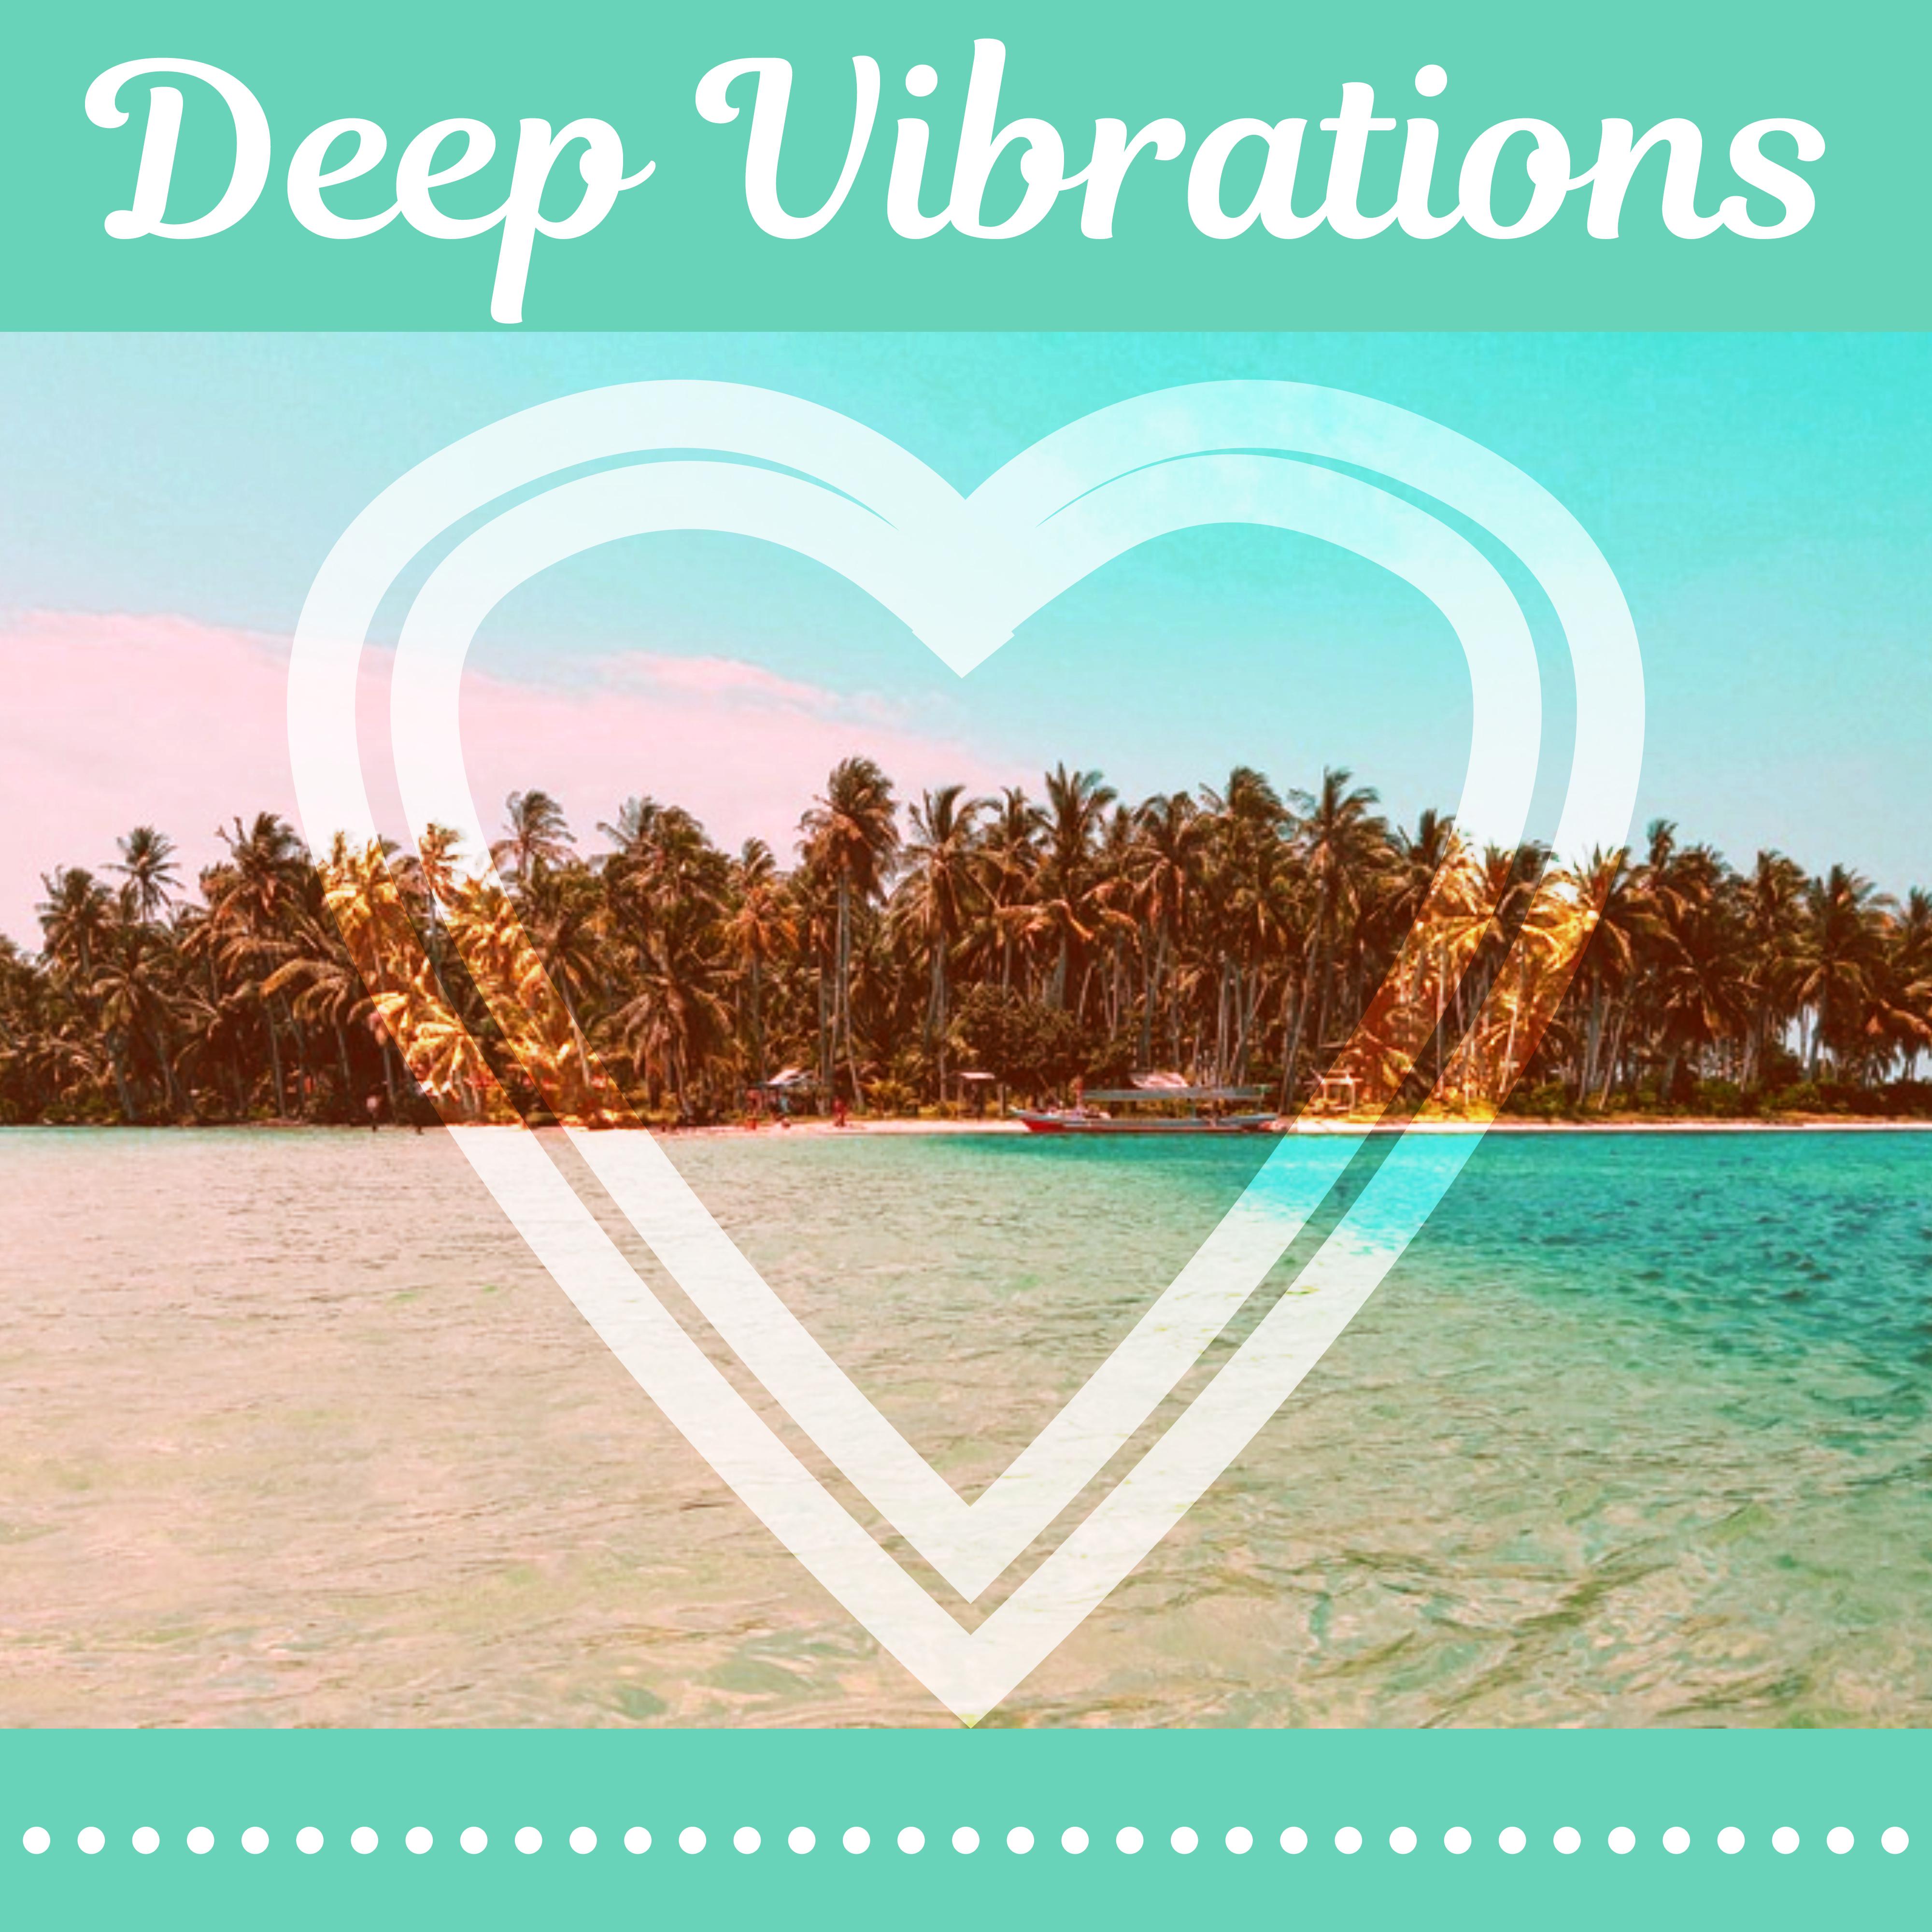 Deep Vibrations - **** Vibes of Chillout Music, Summer Chill Out, Music for Lovers, Ambient Lounge, Beach Chill Out Music, Chill Out Lounge, Relax Time